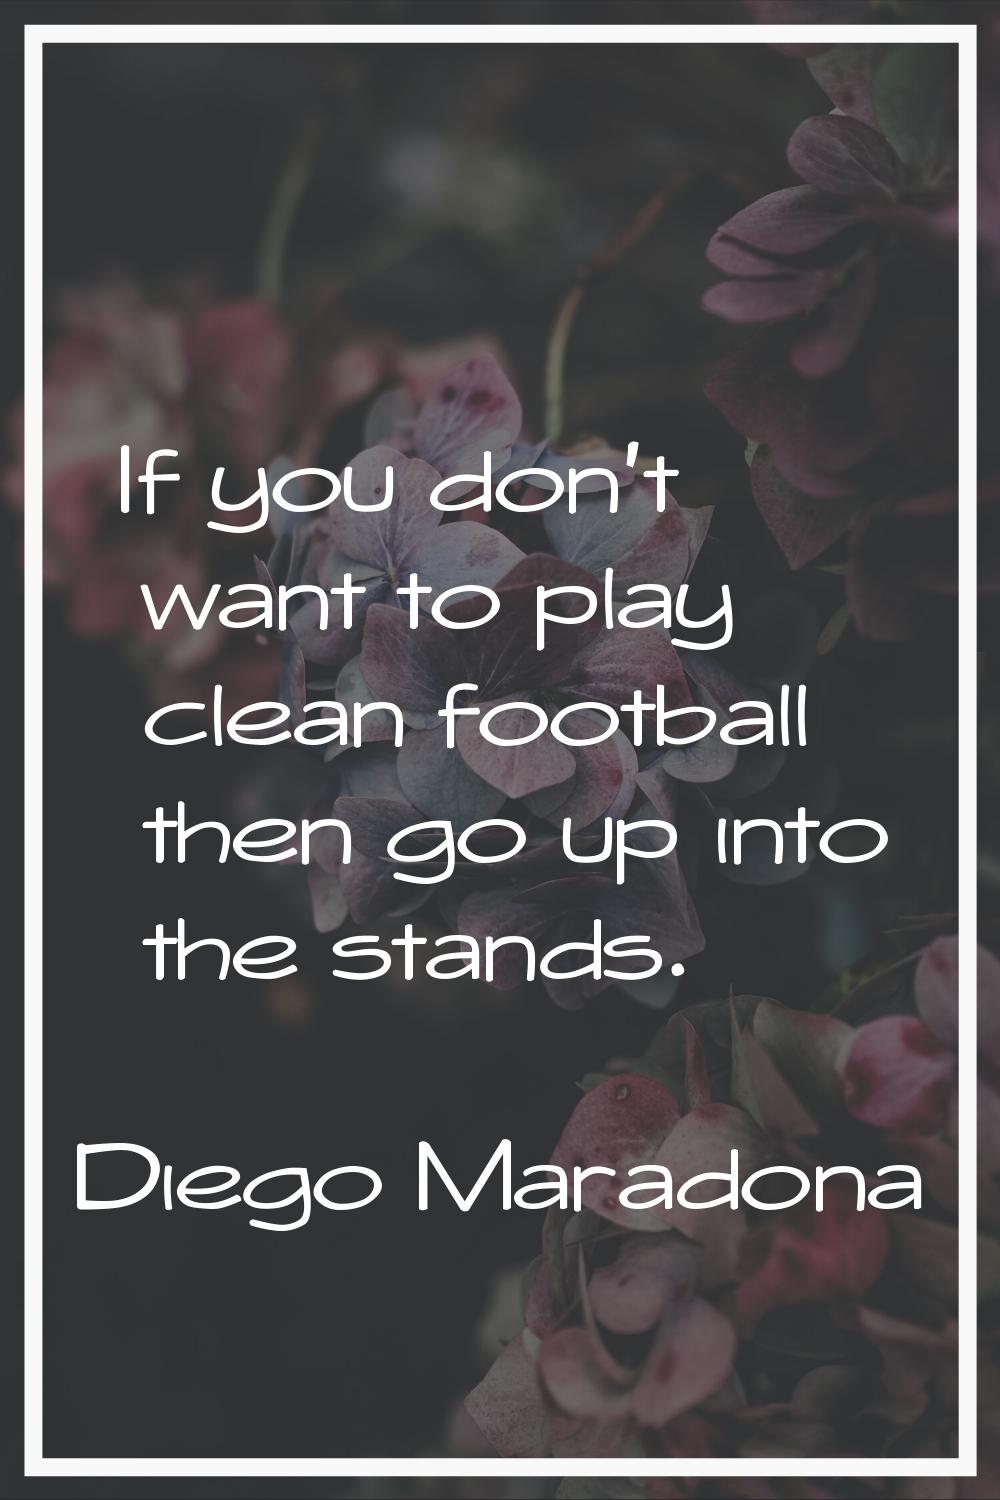 If you don't want to play clean football then go up into the stands.